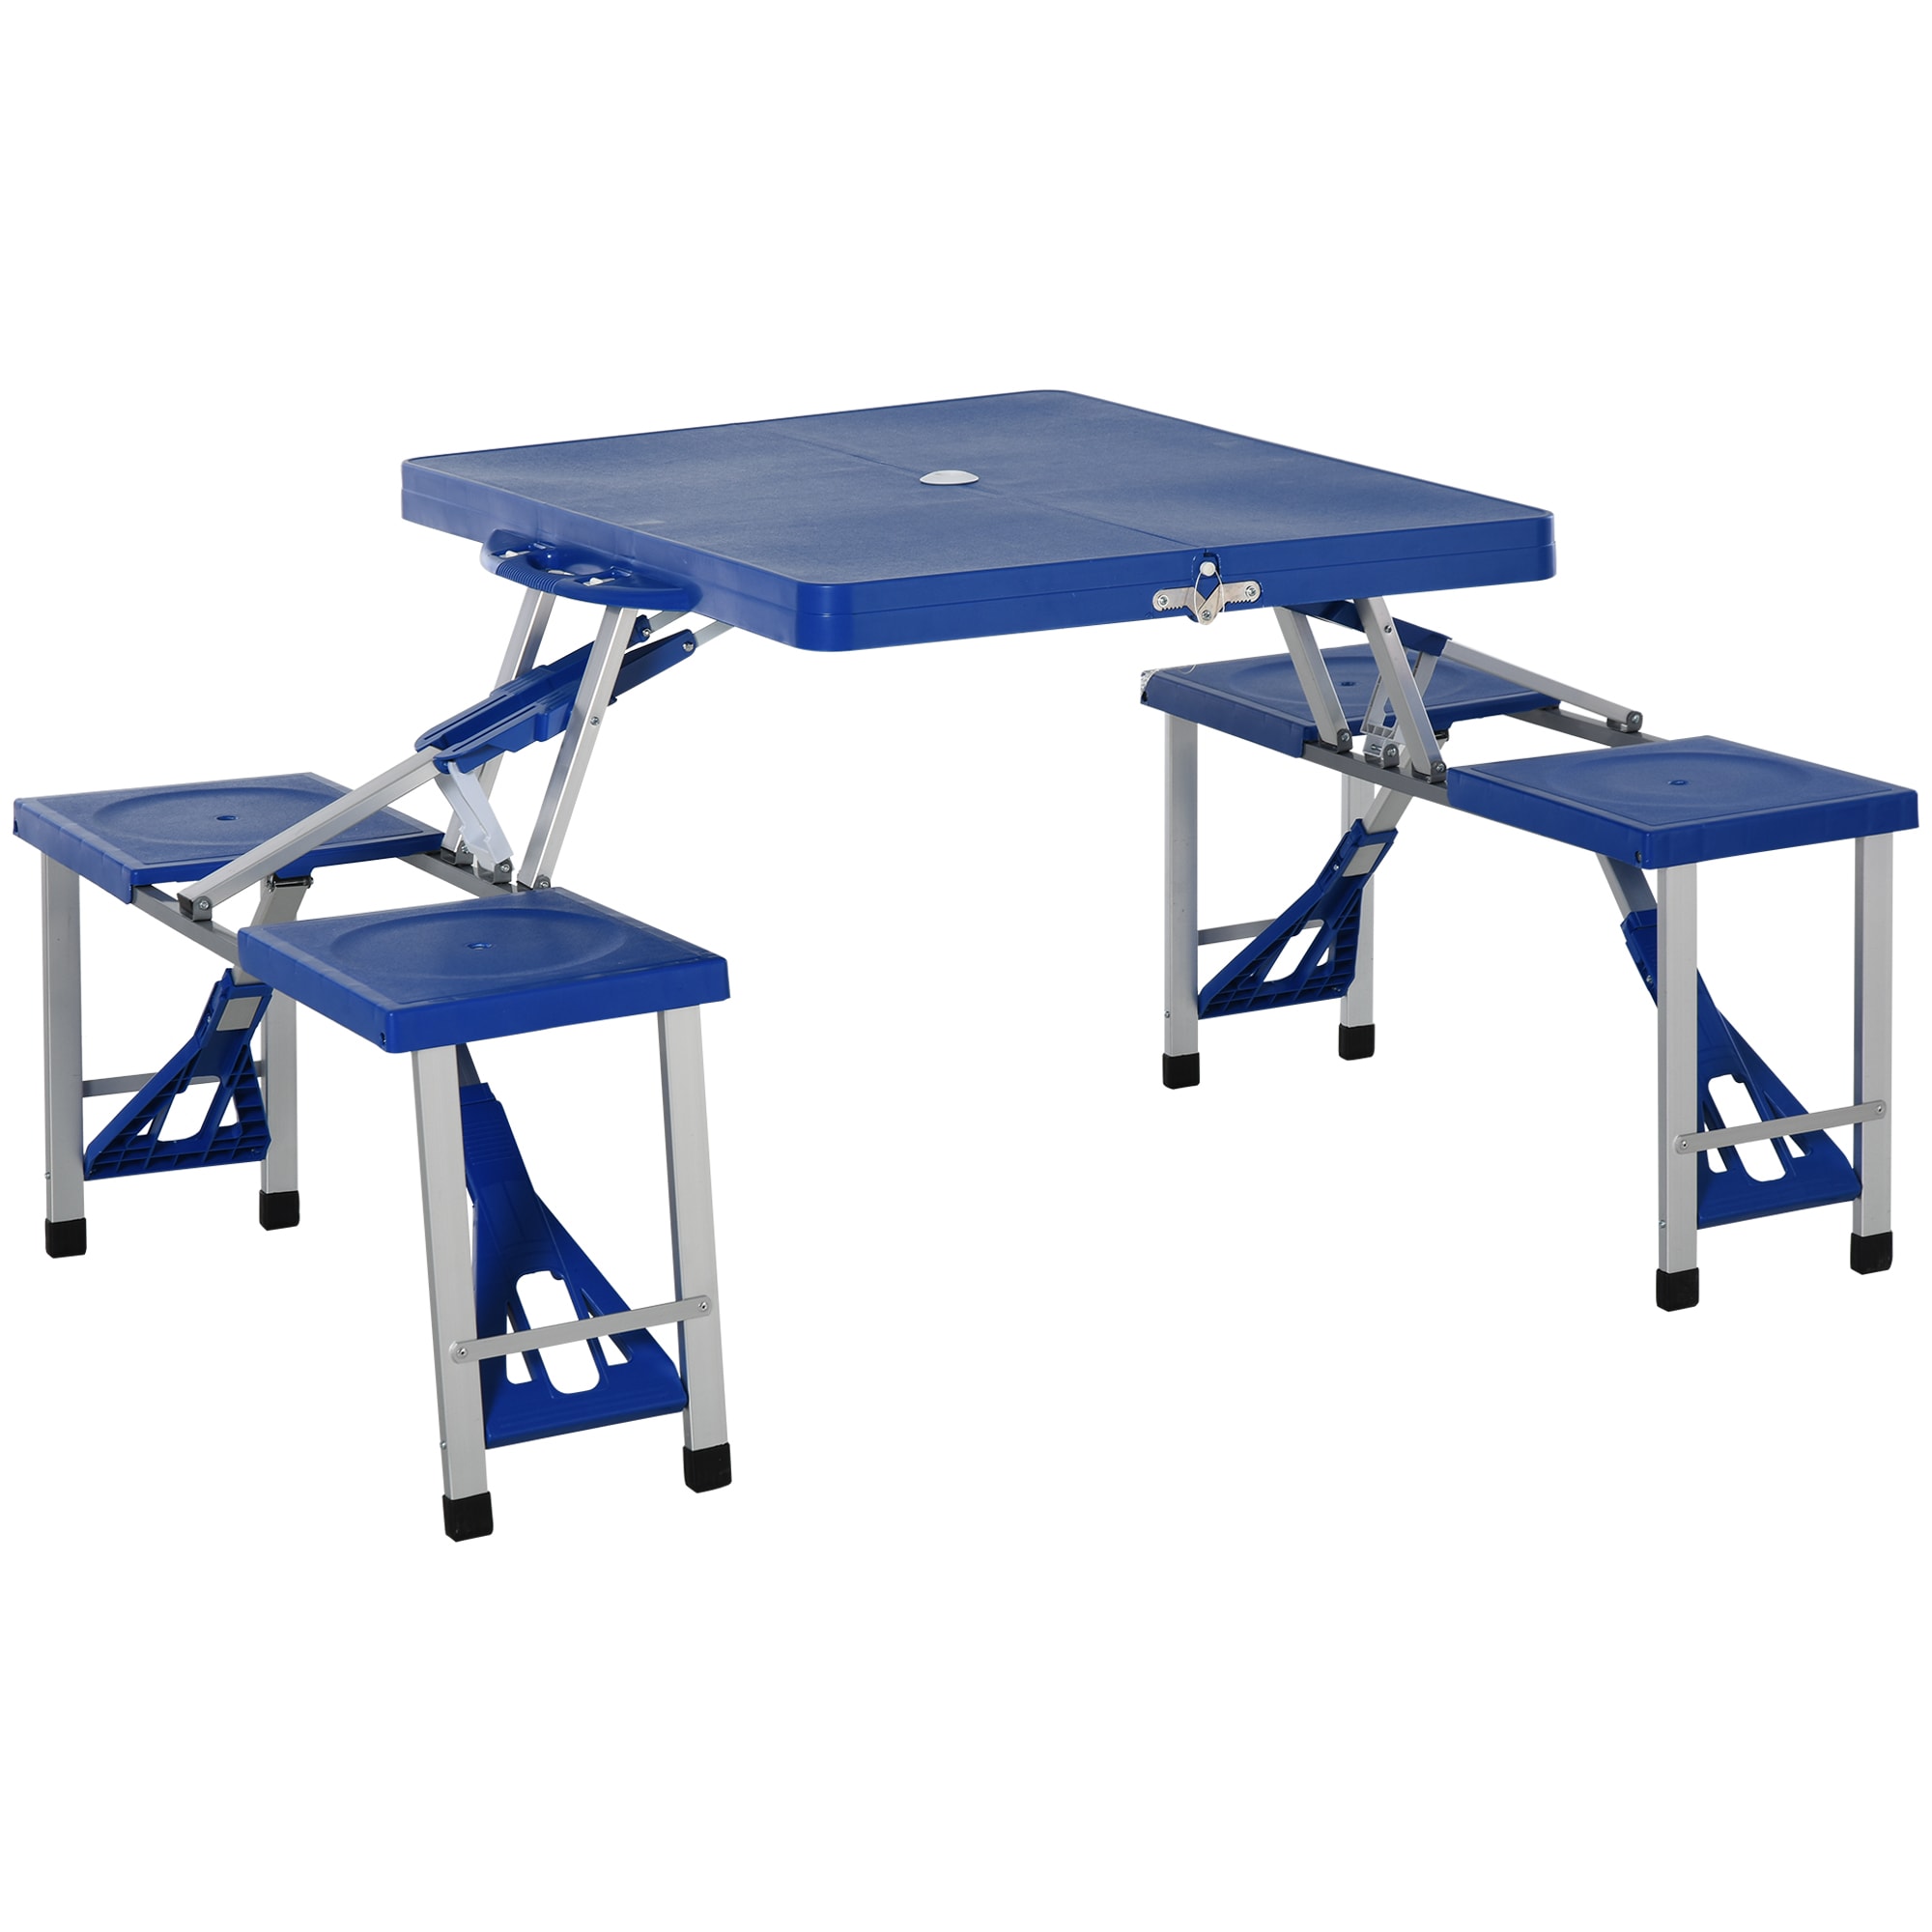 Folding Camping Table And Chair Set 4 Person Portable Family Outdoor Picnic Desk 